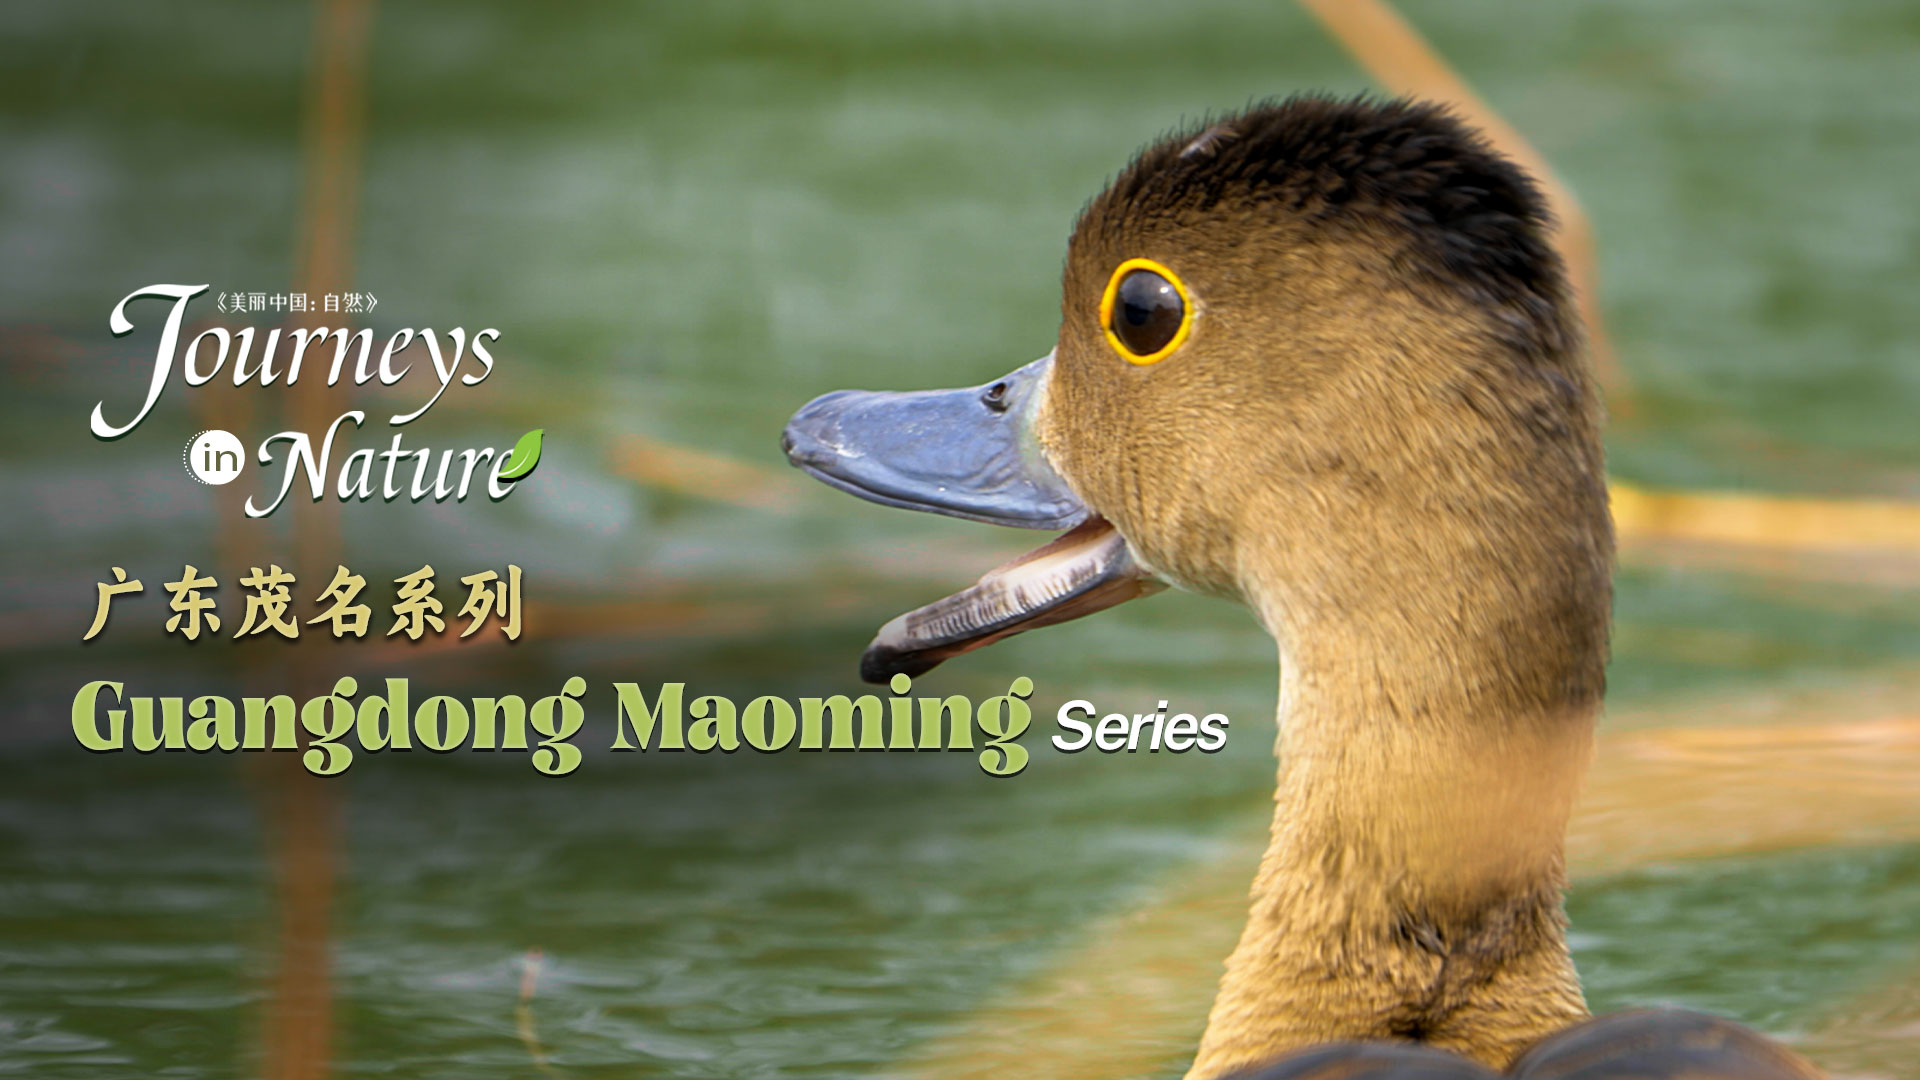 CGTN Nature presents 'Journeys in Nature: Guangdong Maoming Series'